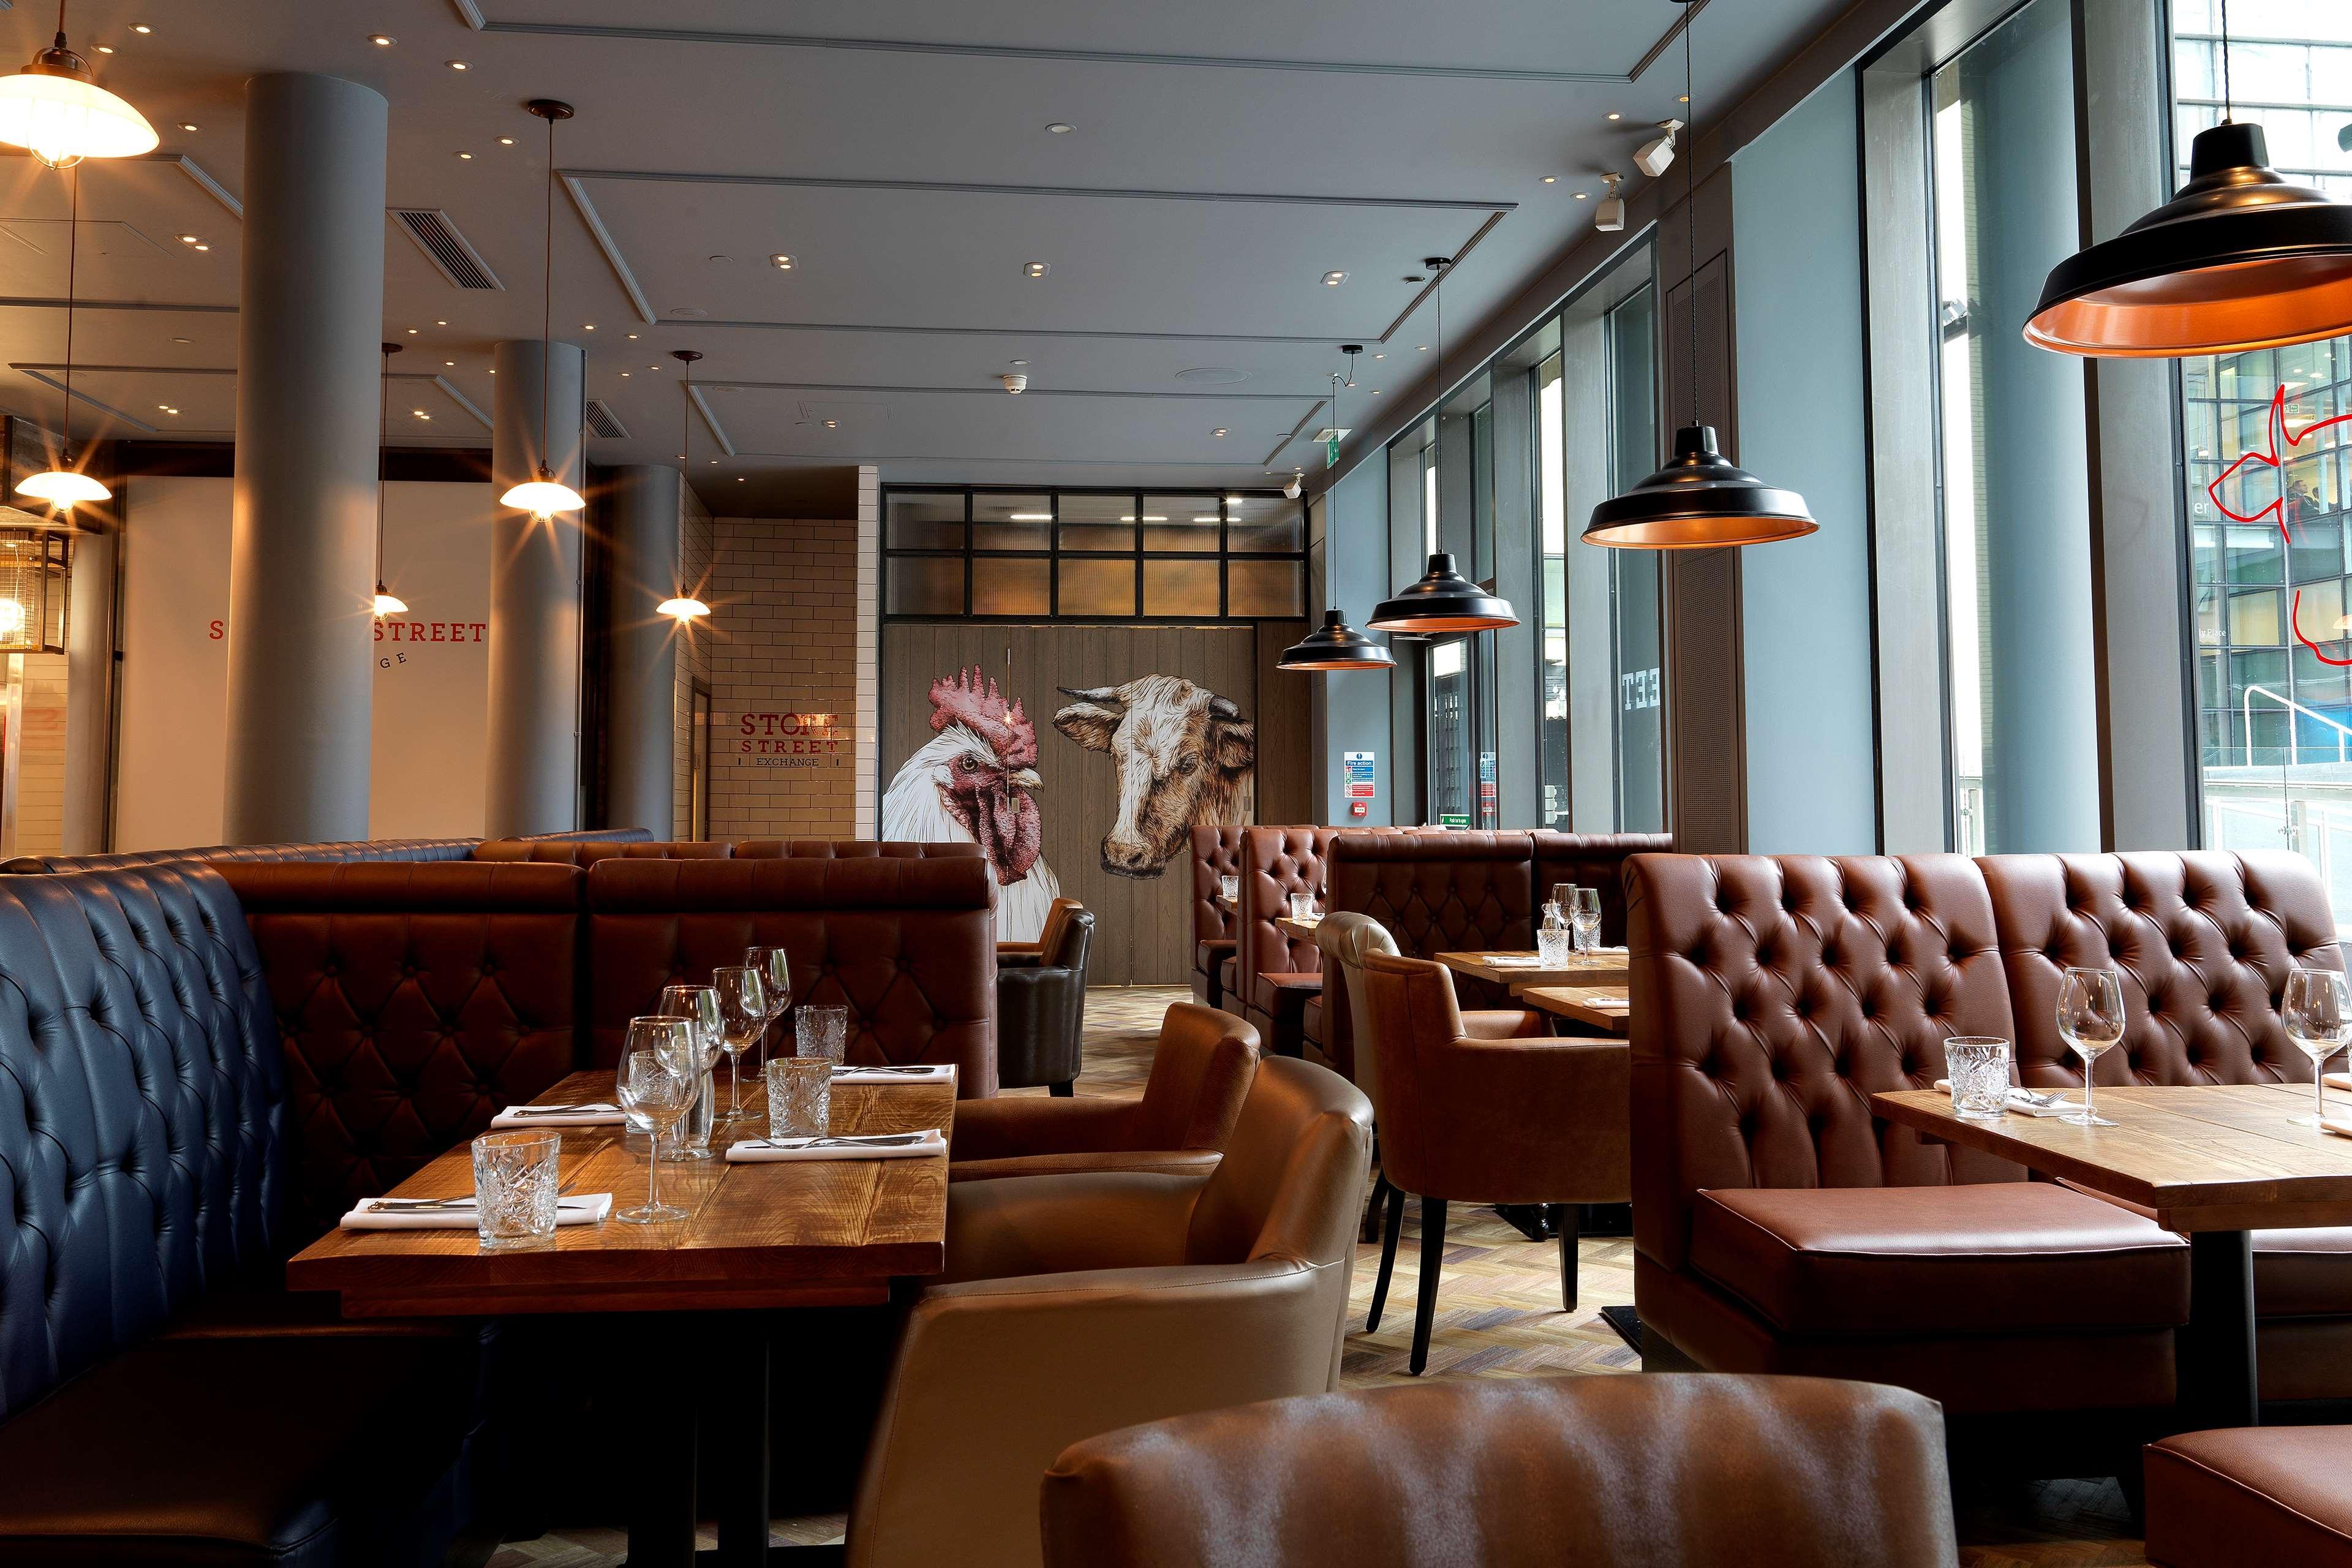 Doubletree By Hilton Manchester Piccadilly Εξωτερικό φωτογραφία